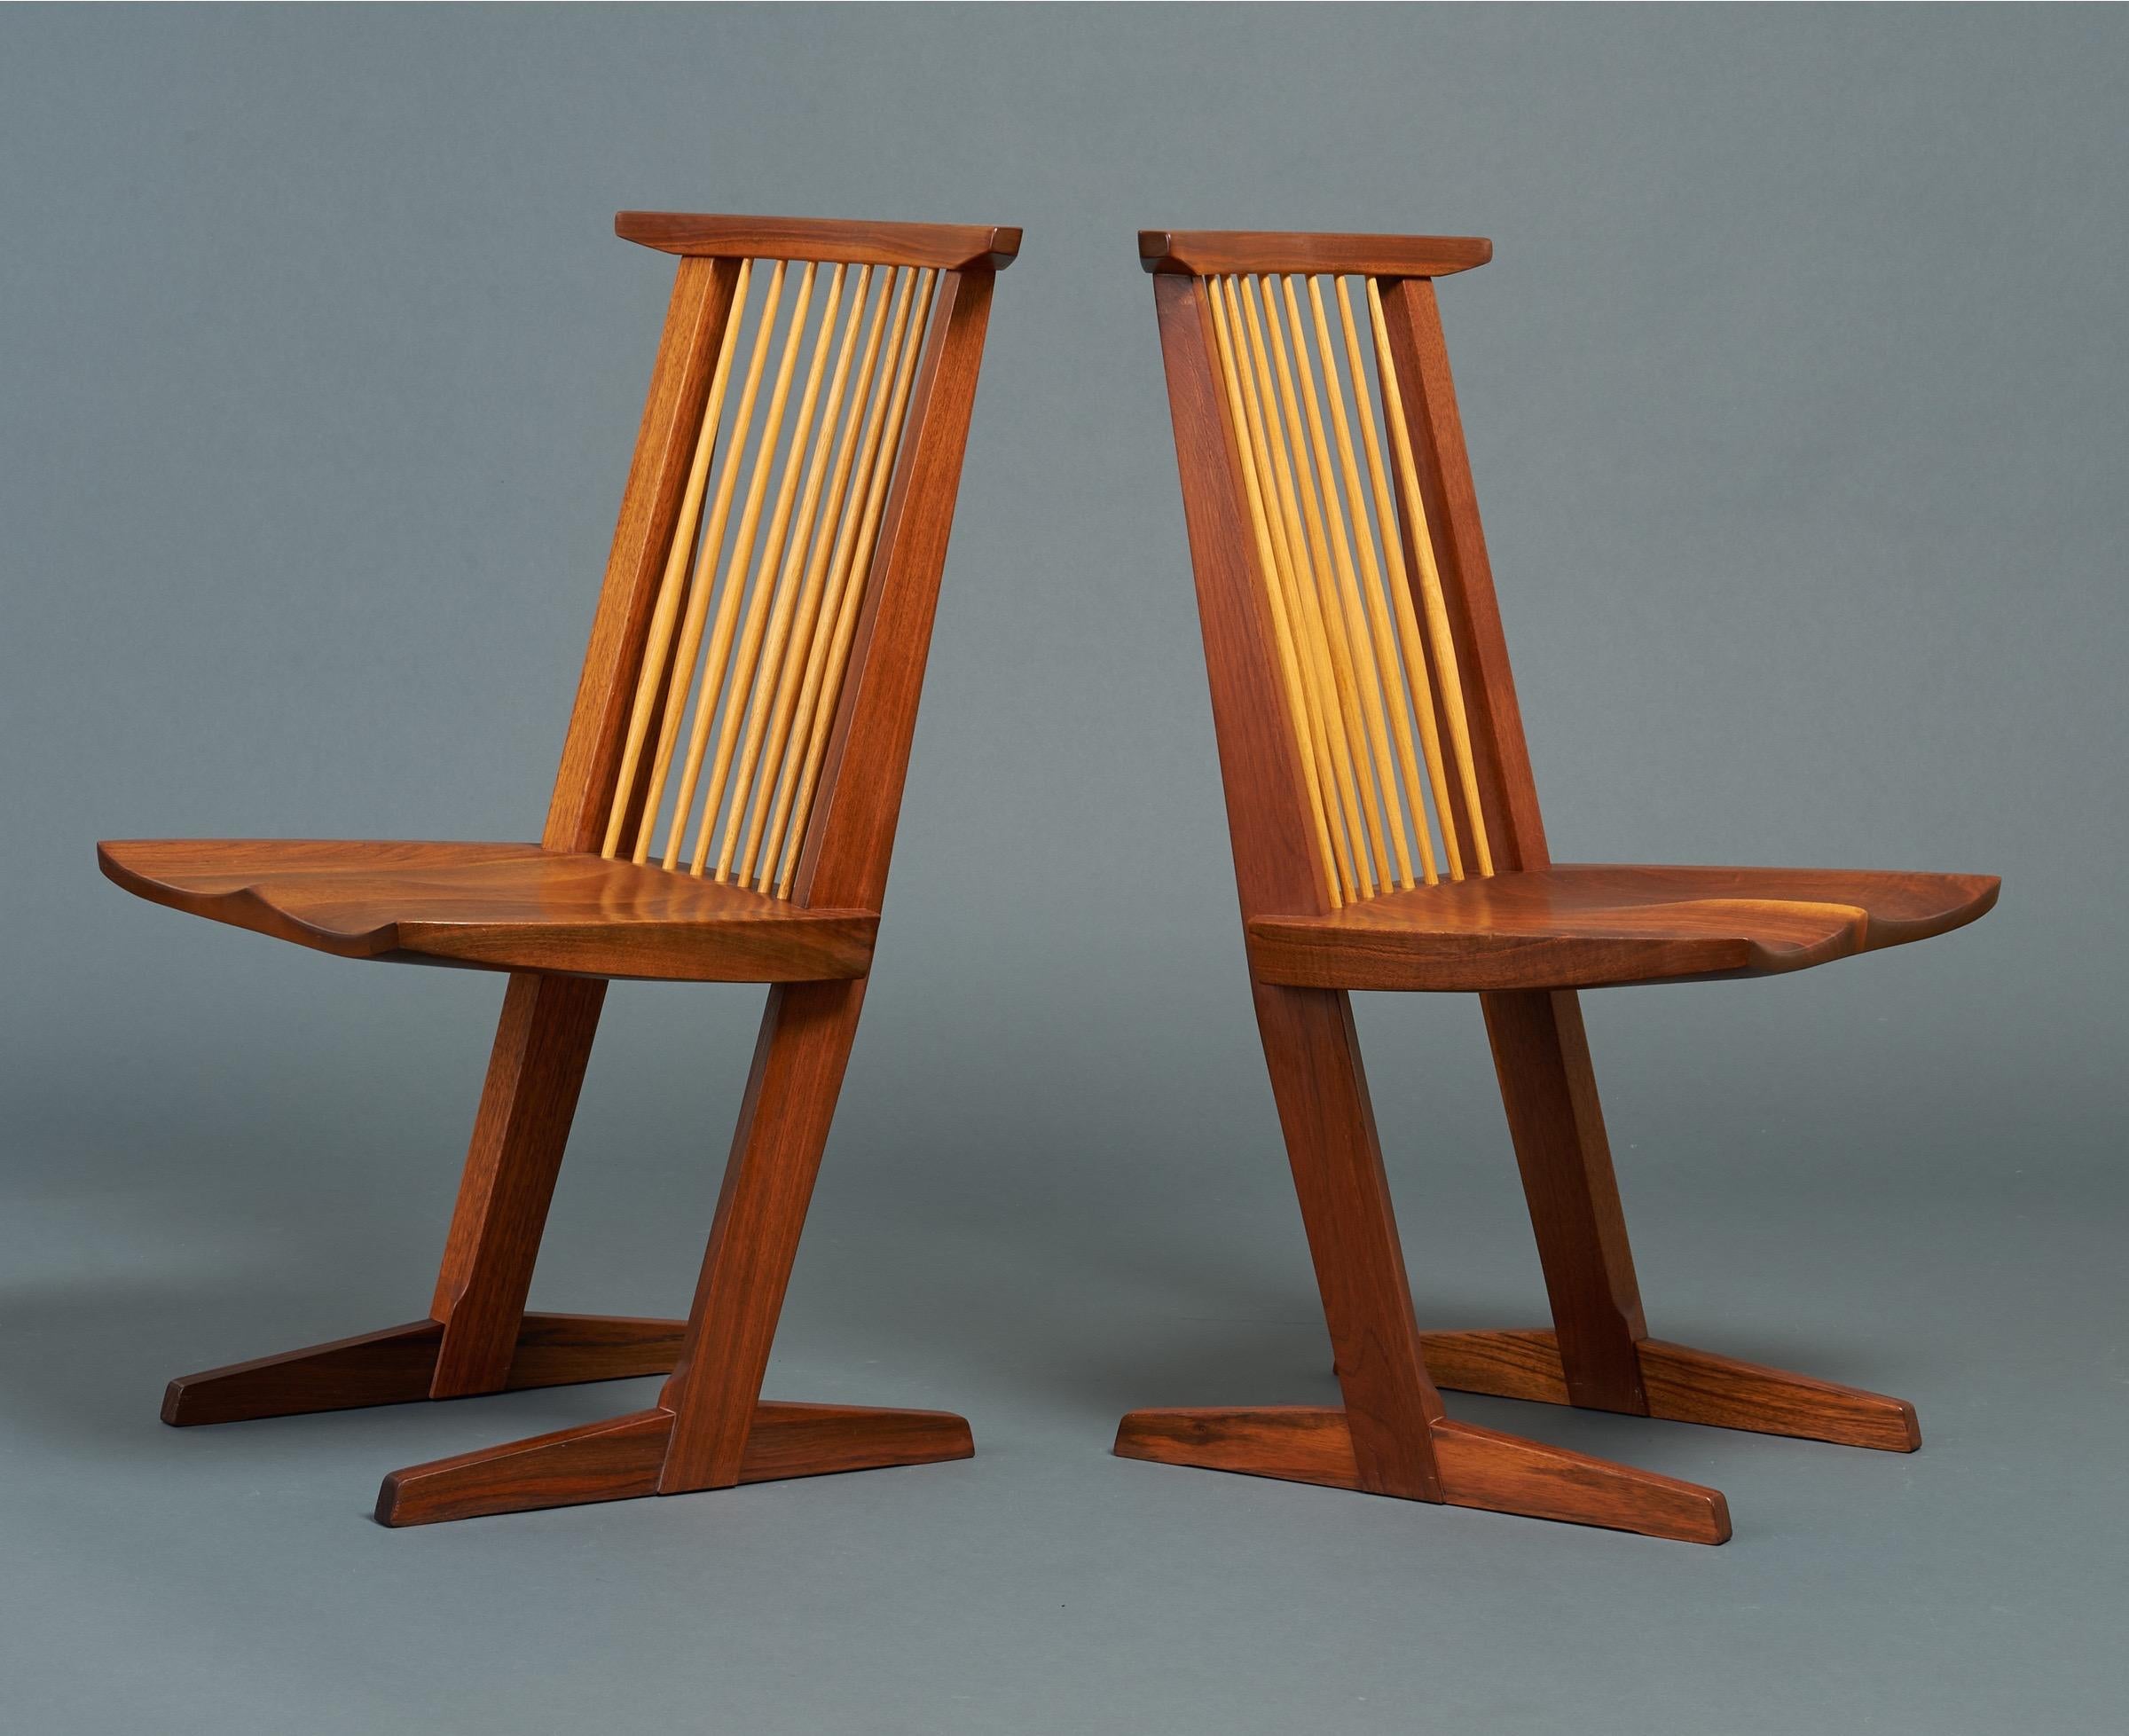 American George Nakashima, Rare Sculptural Pair of Conoid Chairs in Walnut, Signed, 1989 For Sale